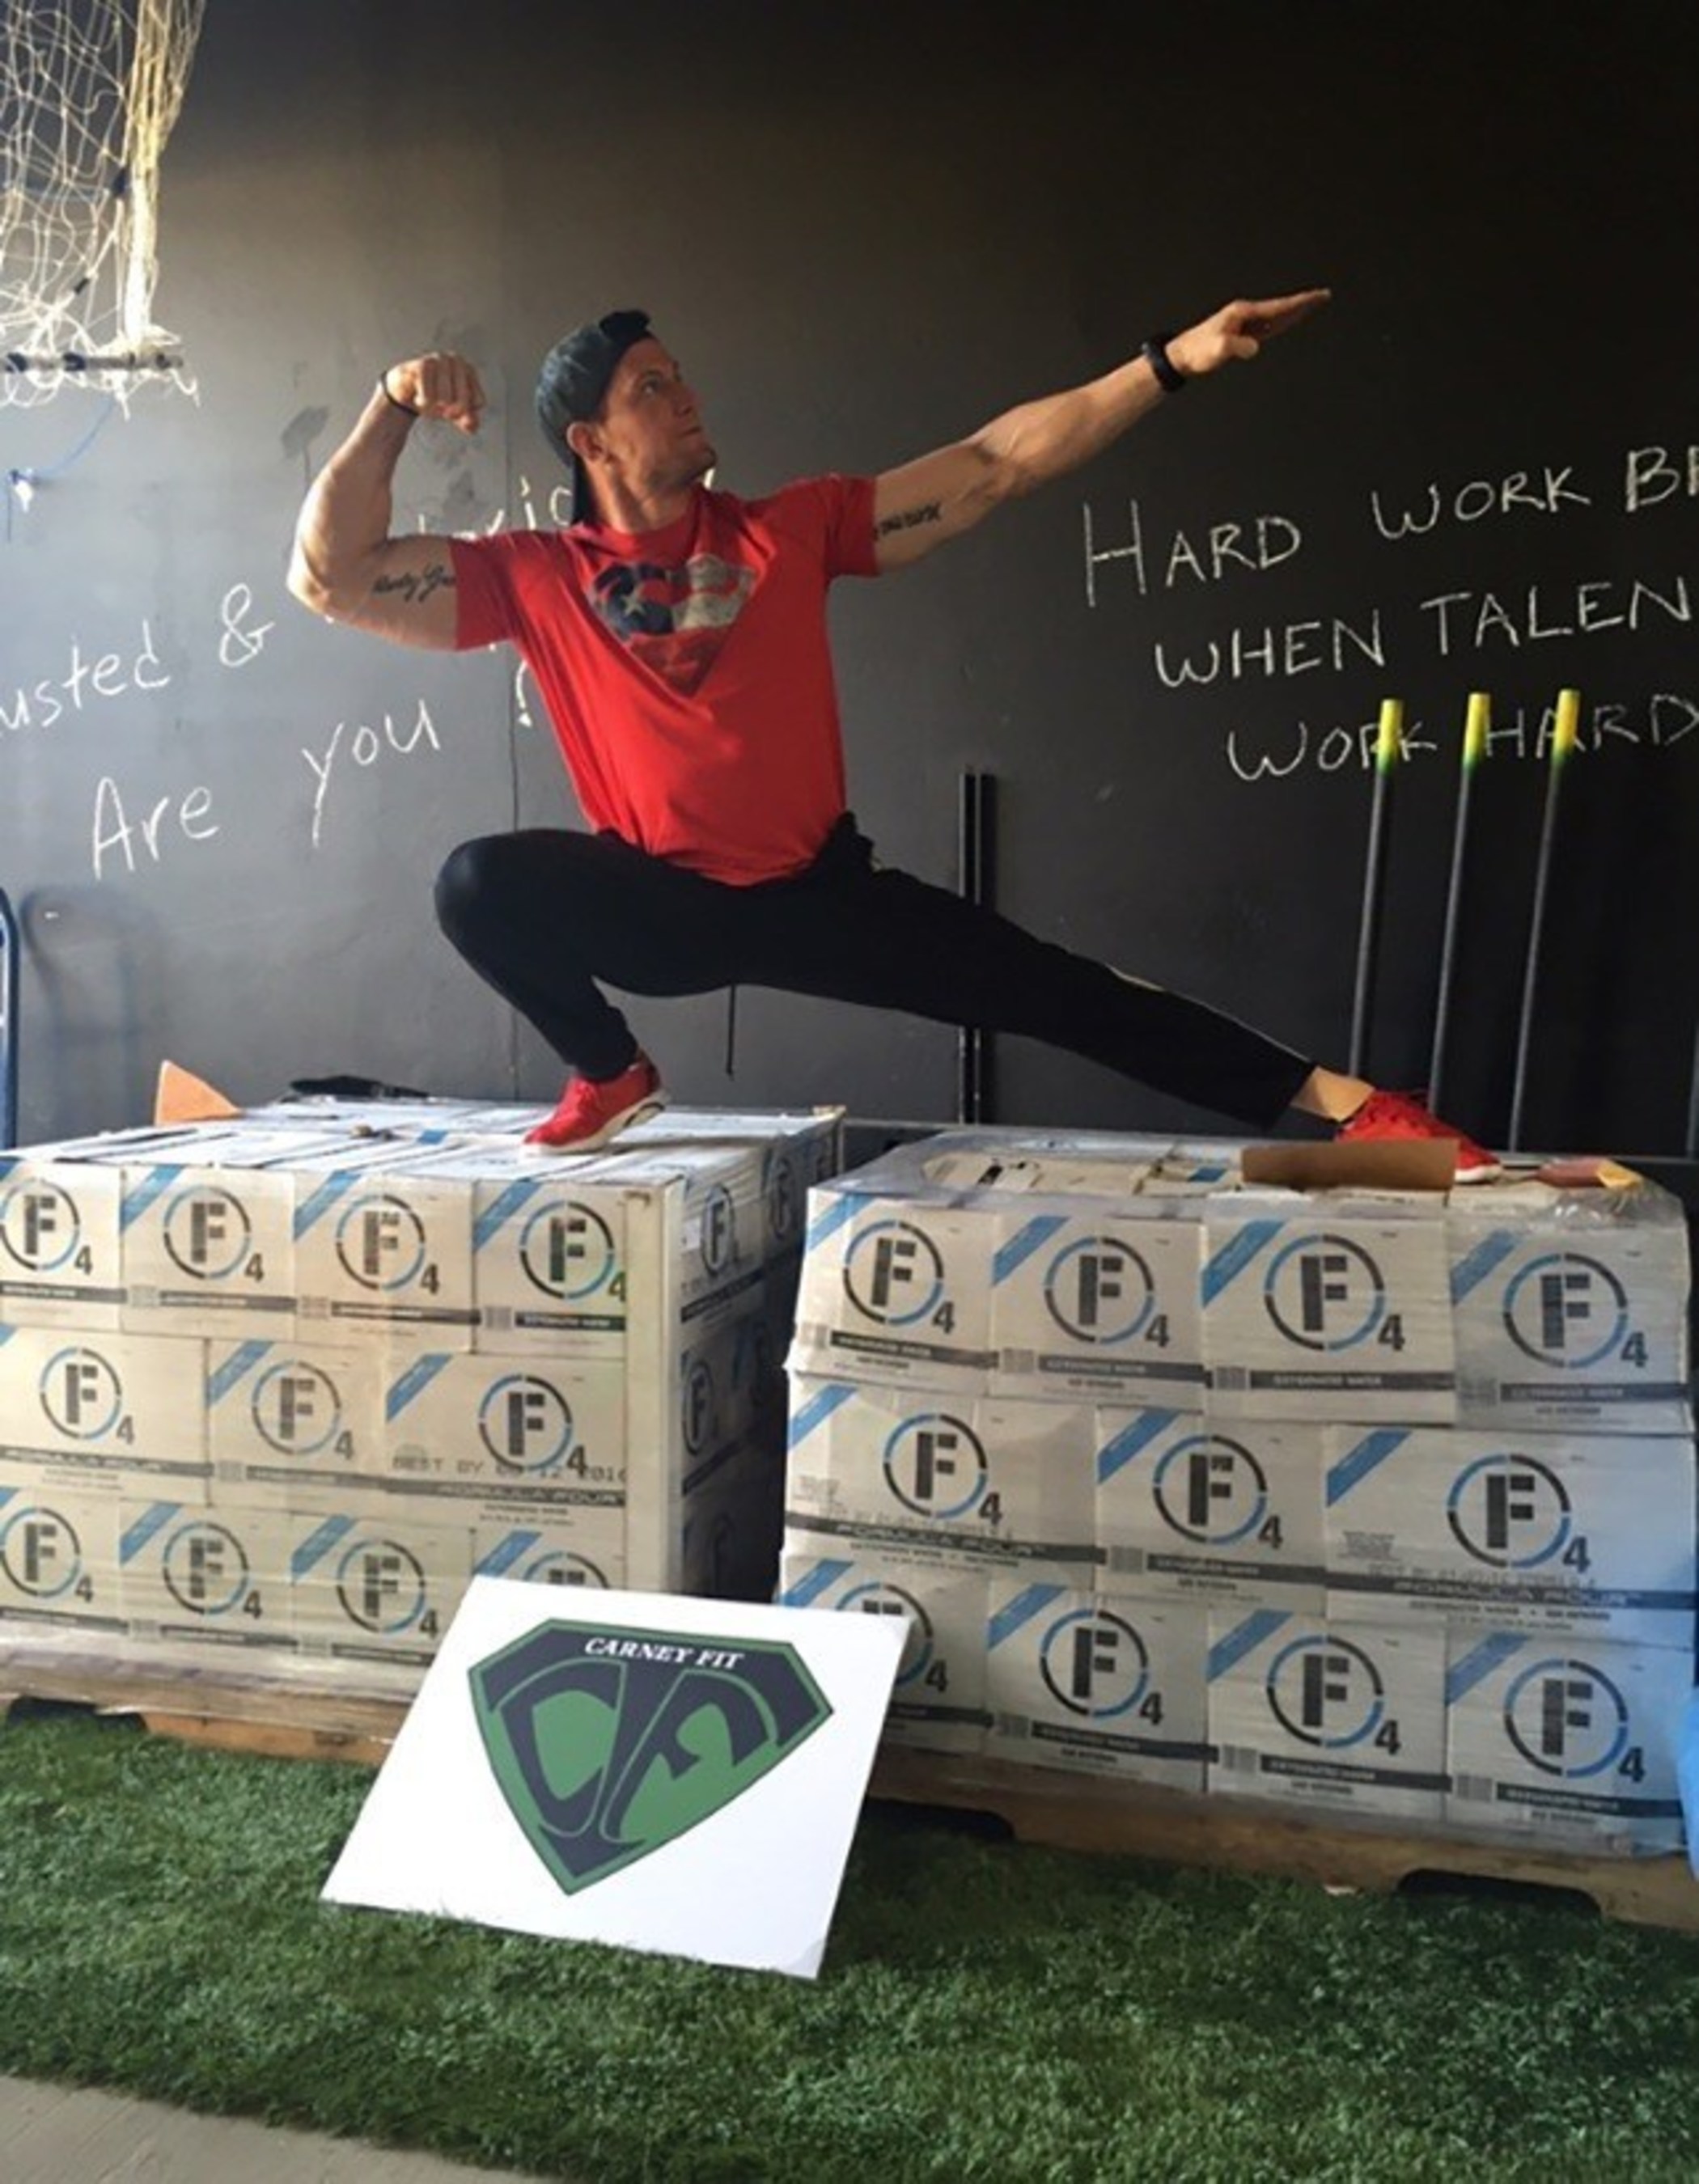 The NFL's "Fittest Player," New York Giants punter Steve Weatherford, poses with his stock of Formula Four Oxygenated Water. Weatherford has joined the Formula Four team as a brand ambassador, helping to raise awareness about the benefits of Formula Four's stabilized oxygen content, which was recently scientifically proven to increase lactate clearance, speeding up the body's ability to recover. Formula Four is available at grocery stores across North America and is launching on Amazon.com in February.